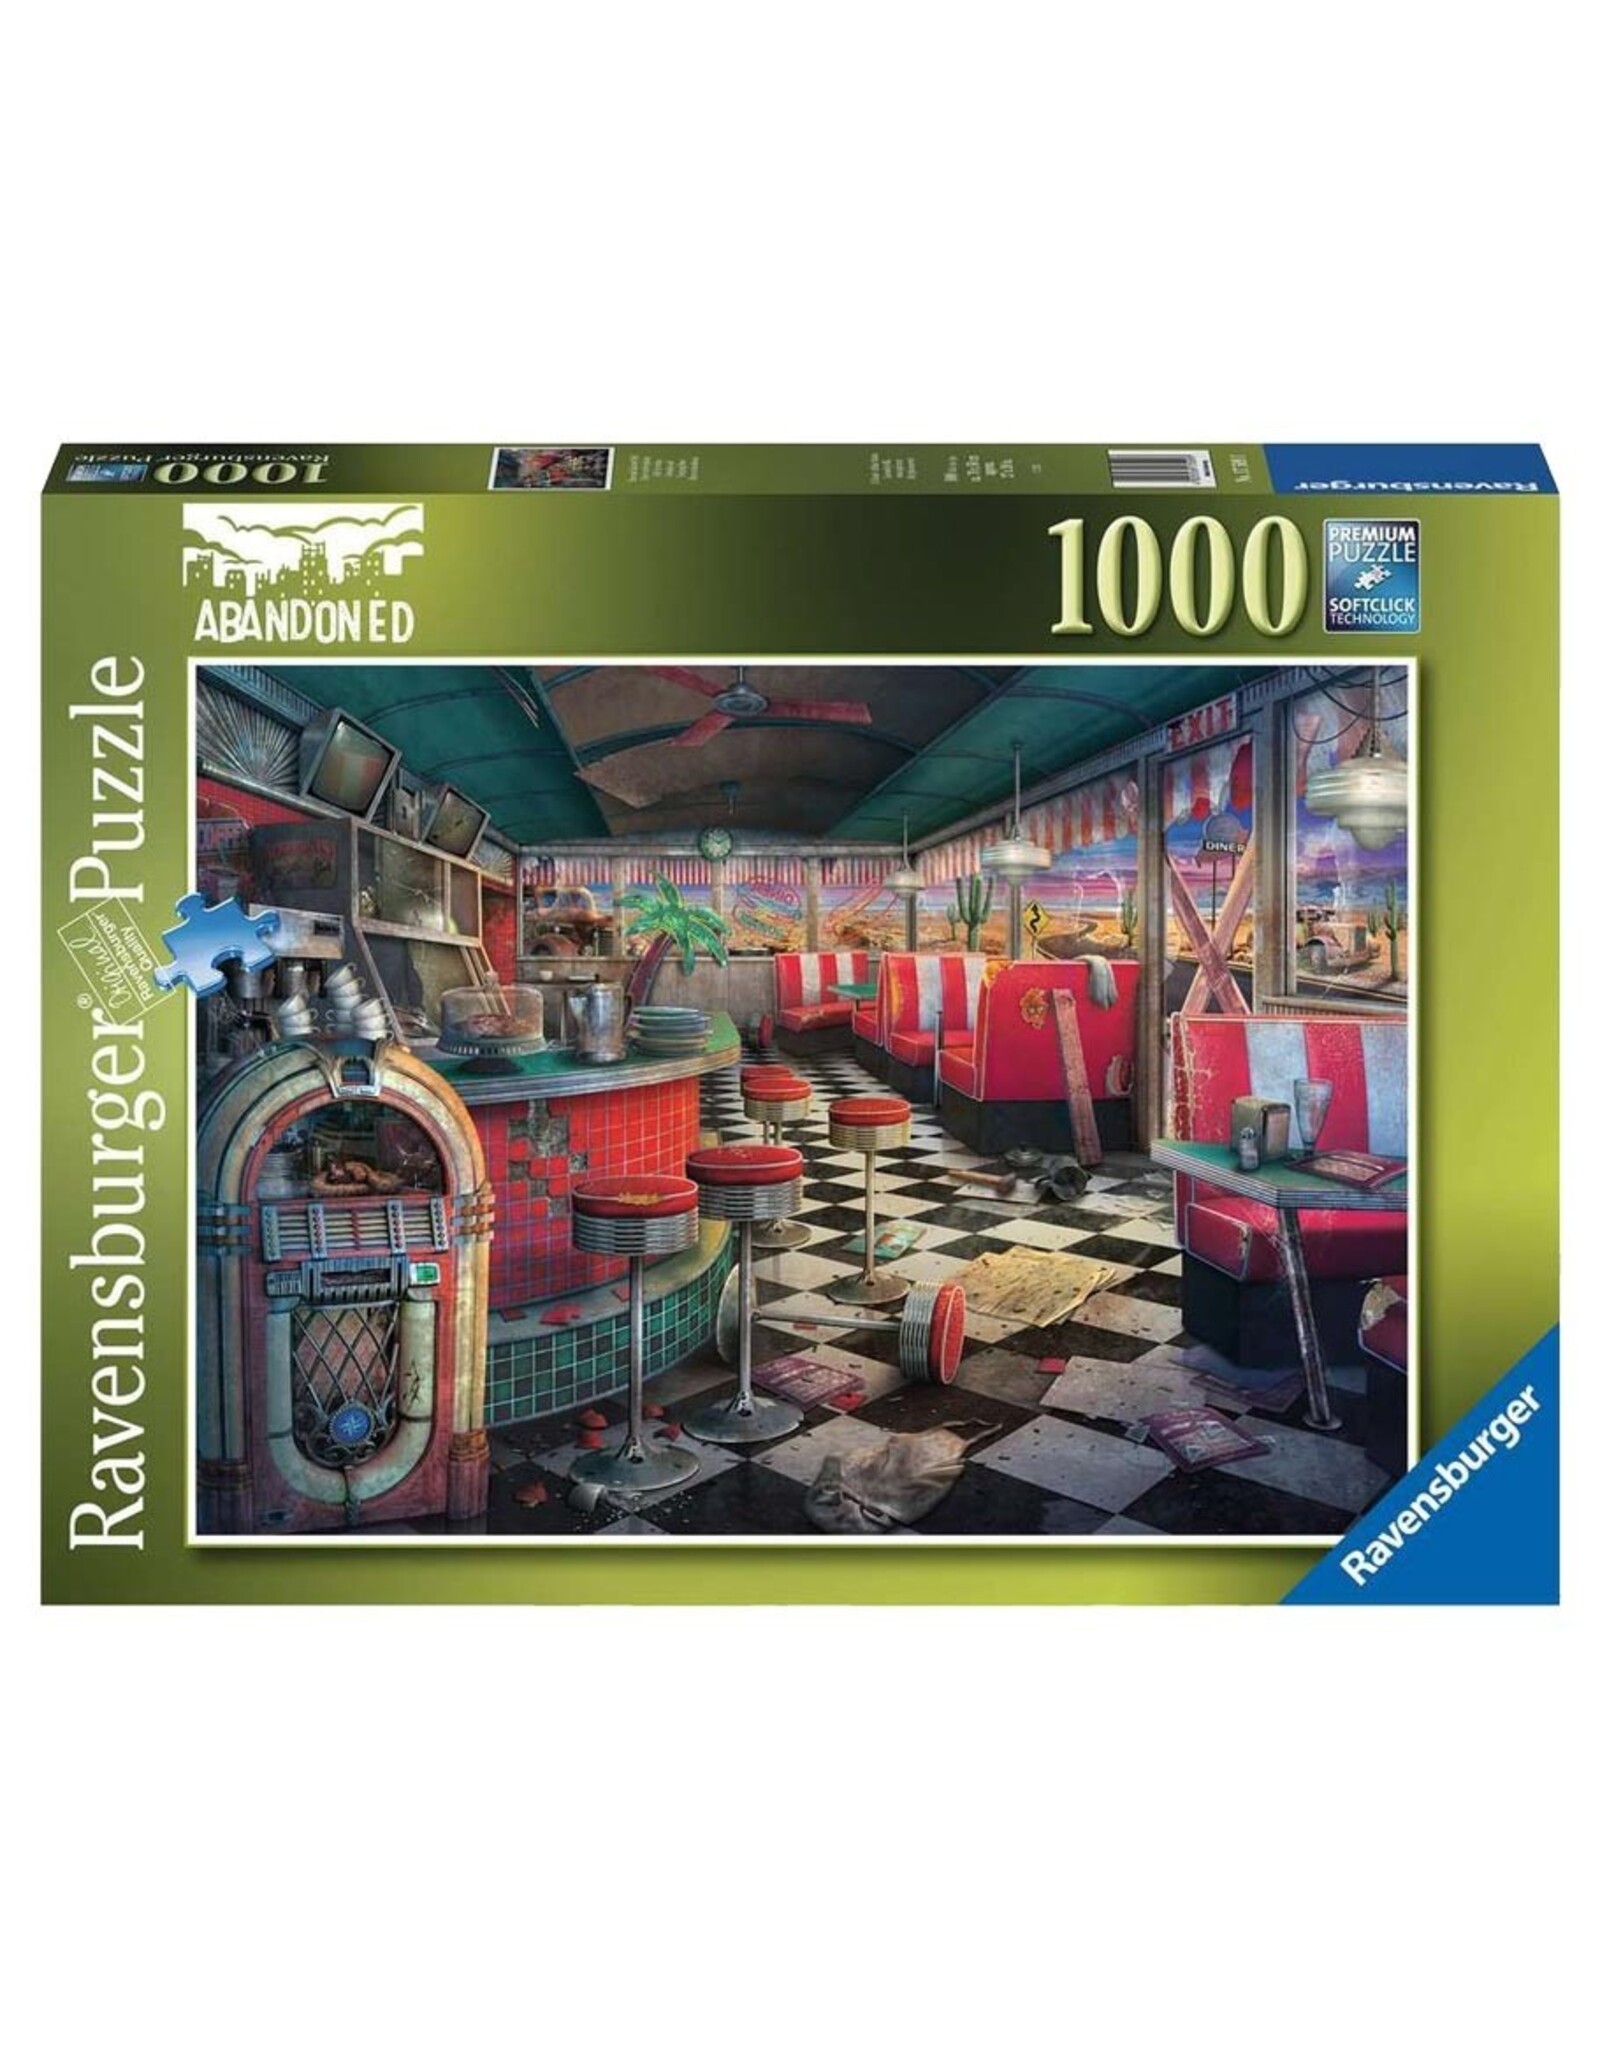 Ravensburger Puzzle: Decaying Diner 1000pc